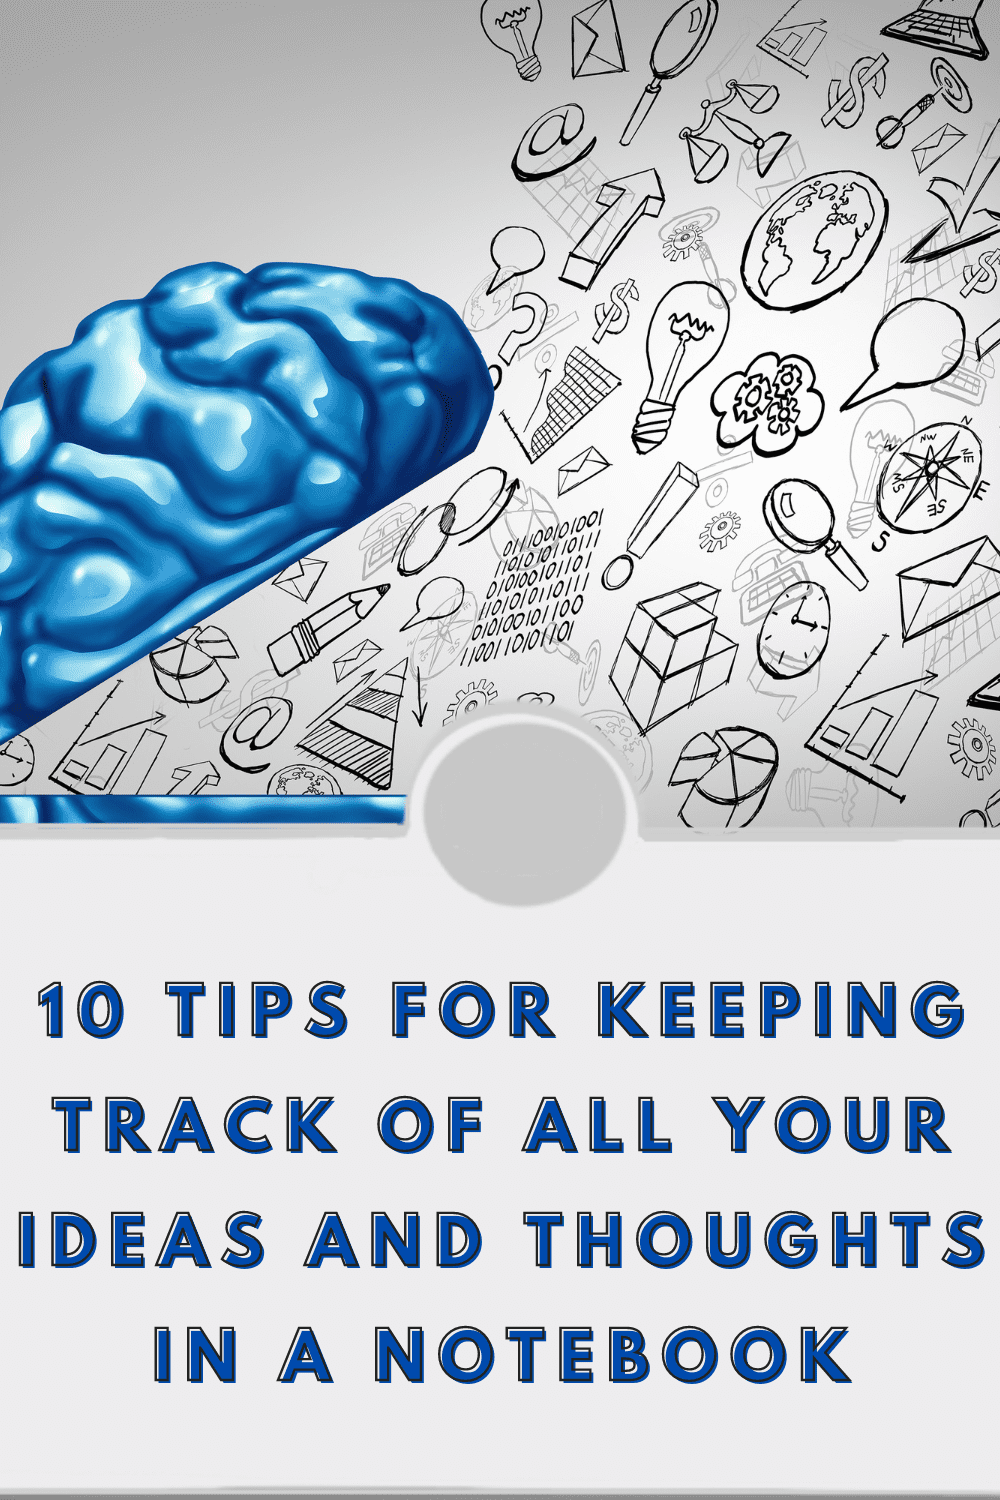 How To Keep Track Of New Ideas And Thoughts In A Notebook